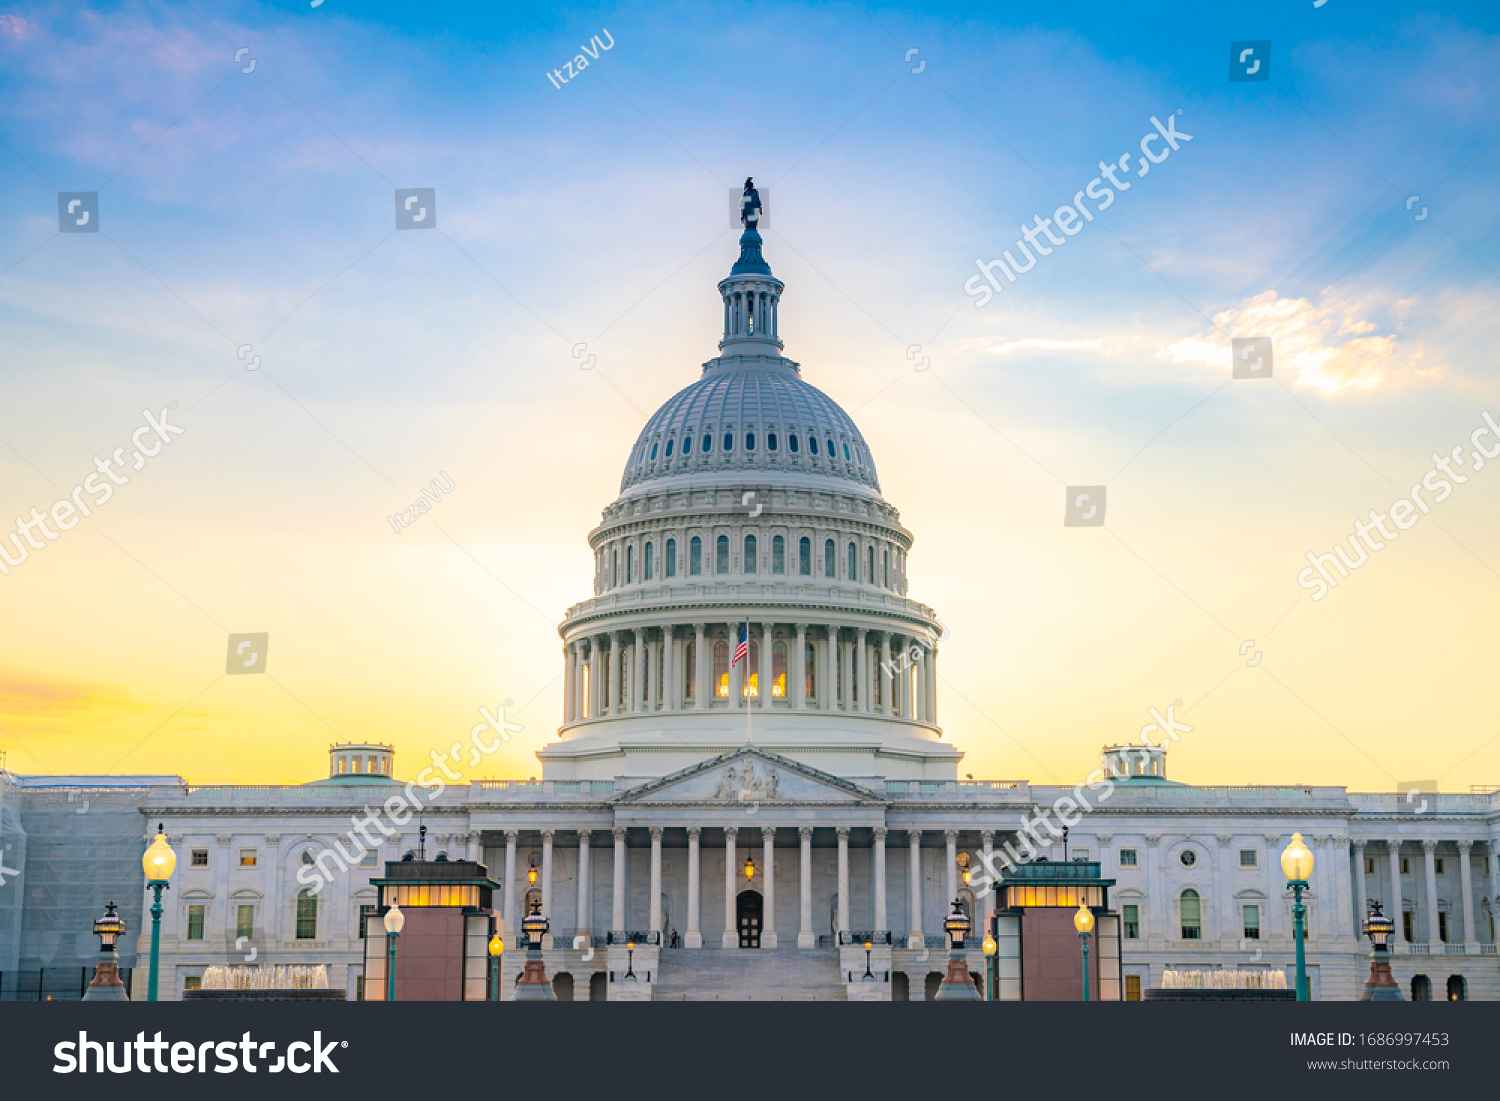 The United States Capitol, often called the Capitol Building, is the home of the United States Congress and the seat of the legislative branch of the U.S. federal government. Washington, United States #1686997453